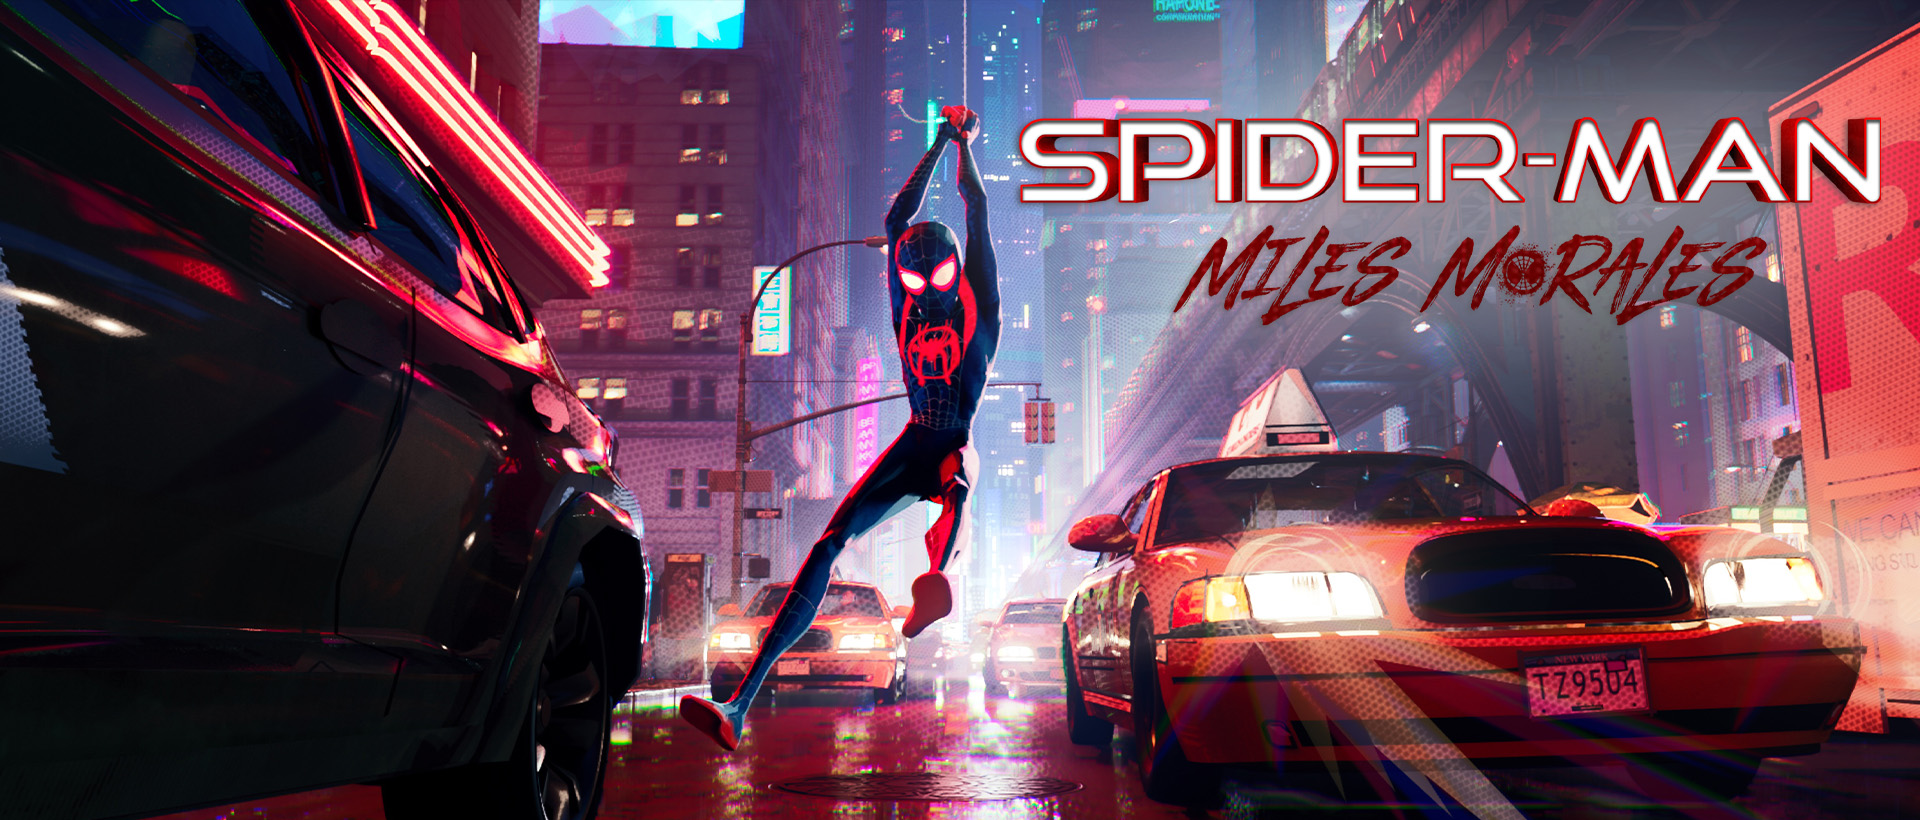 miles morales live action movie banner